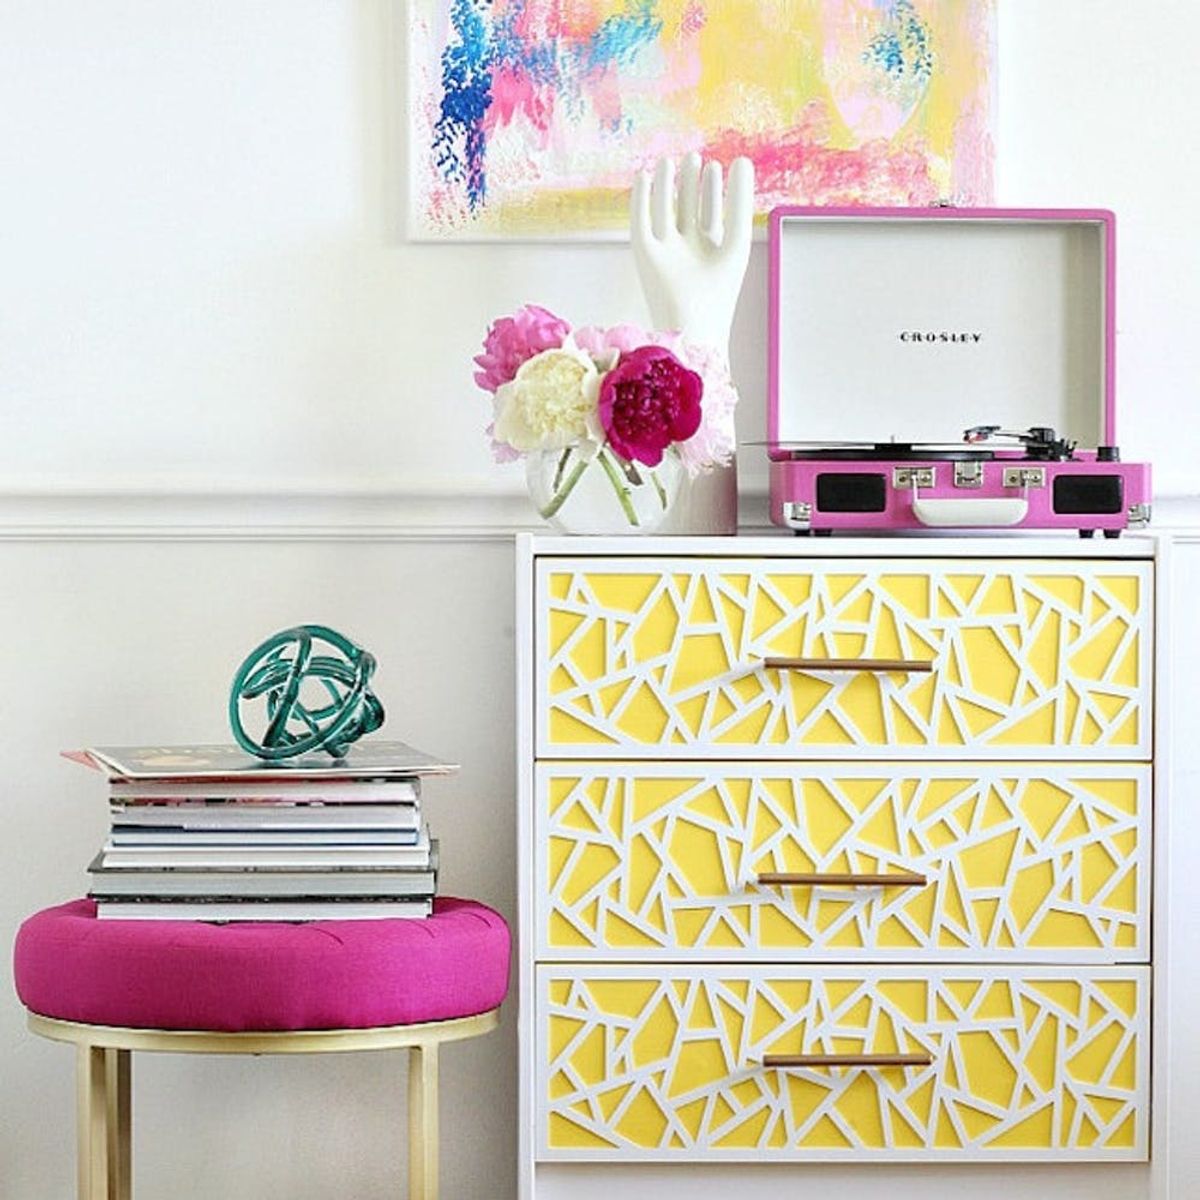 18 DIY Home Decor Ideas for Aries That Are Fearlessly Fab